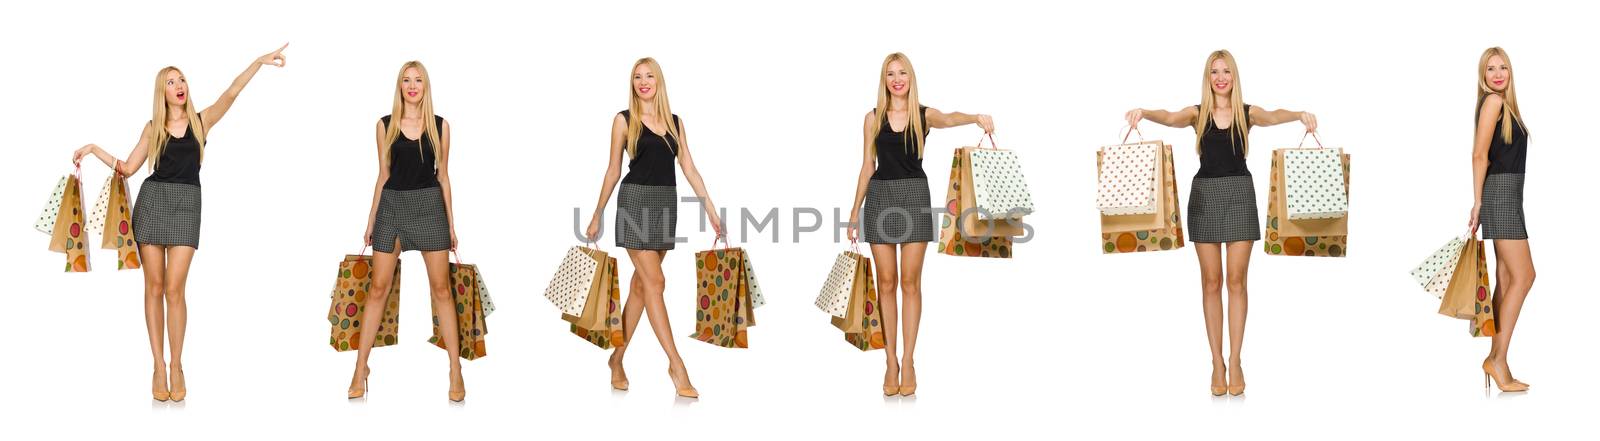 Blond hair model holding plastic bags isolated on white